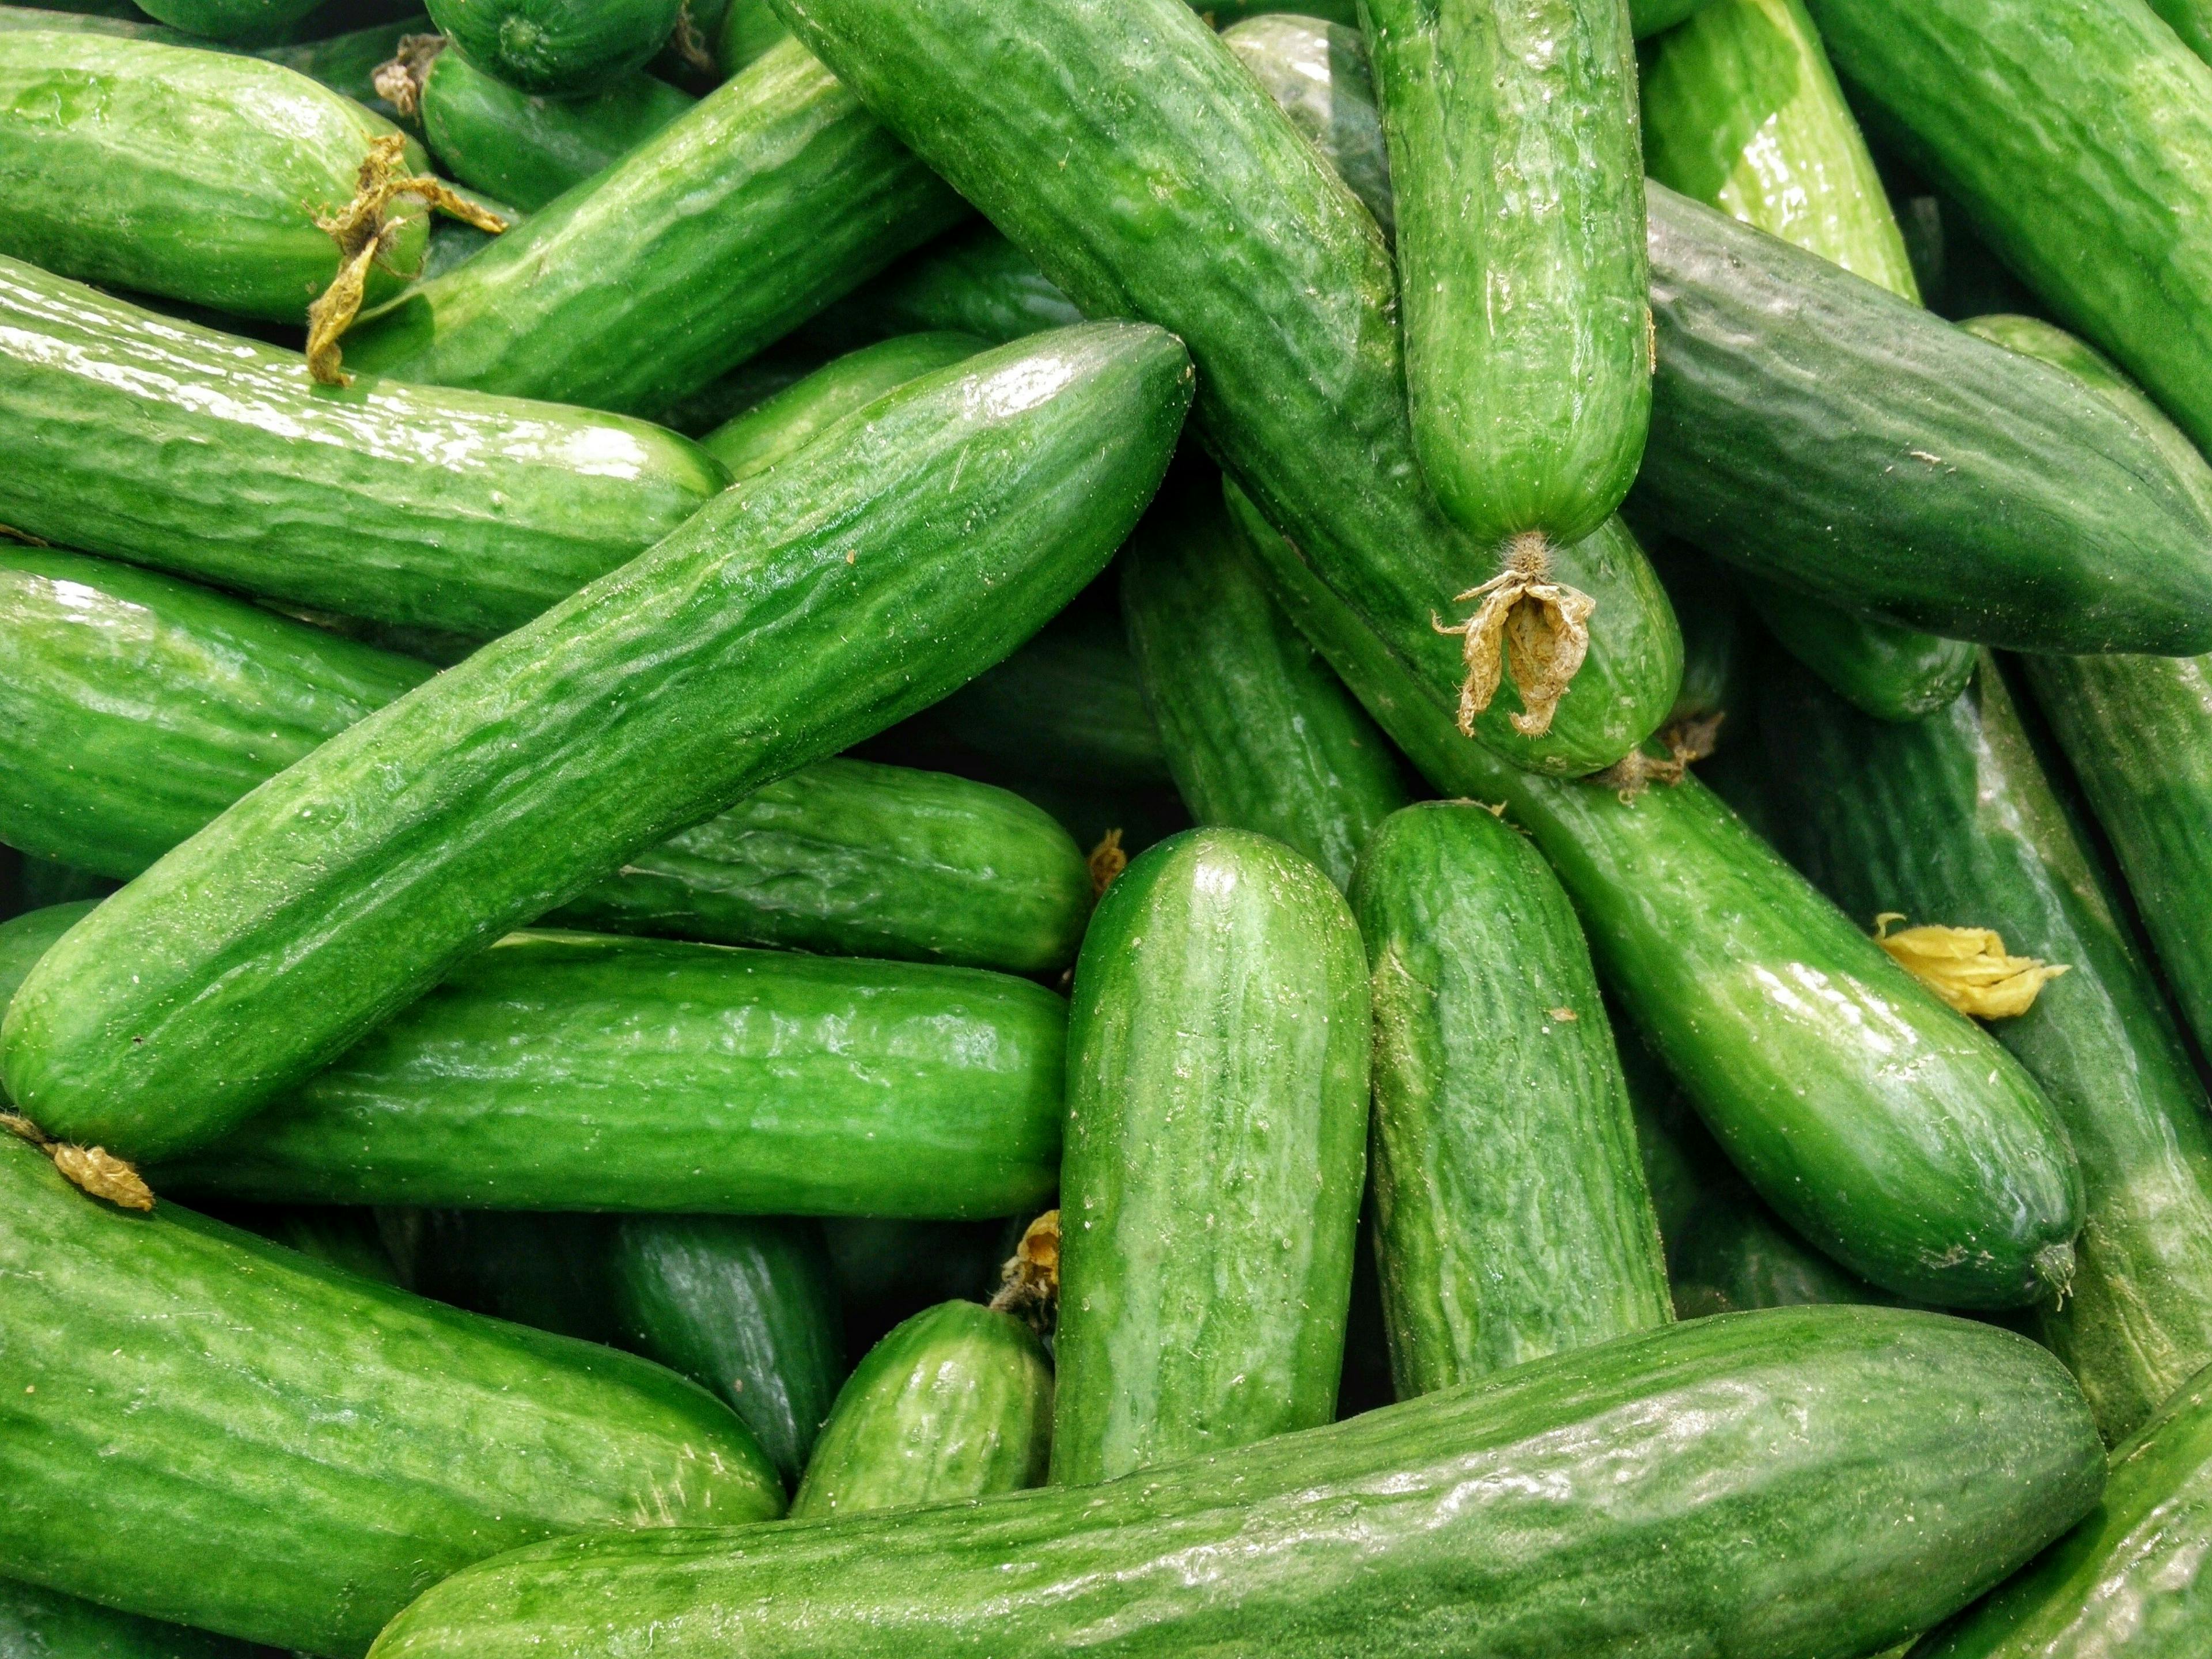 Potential Salmonella Outbreak Associated With Cucumbers